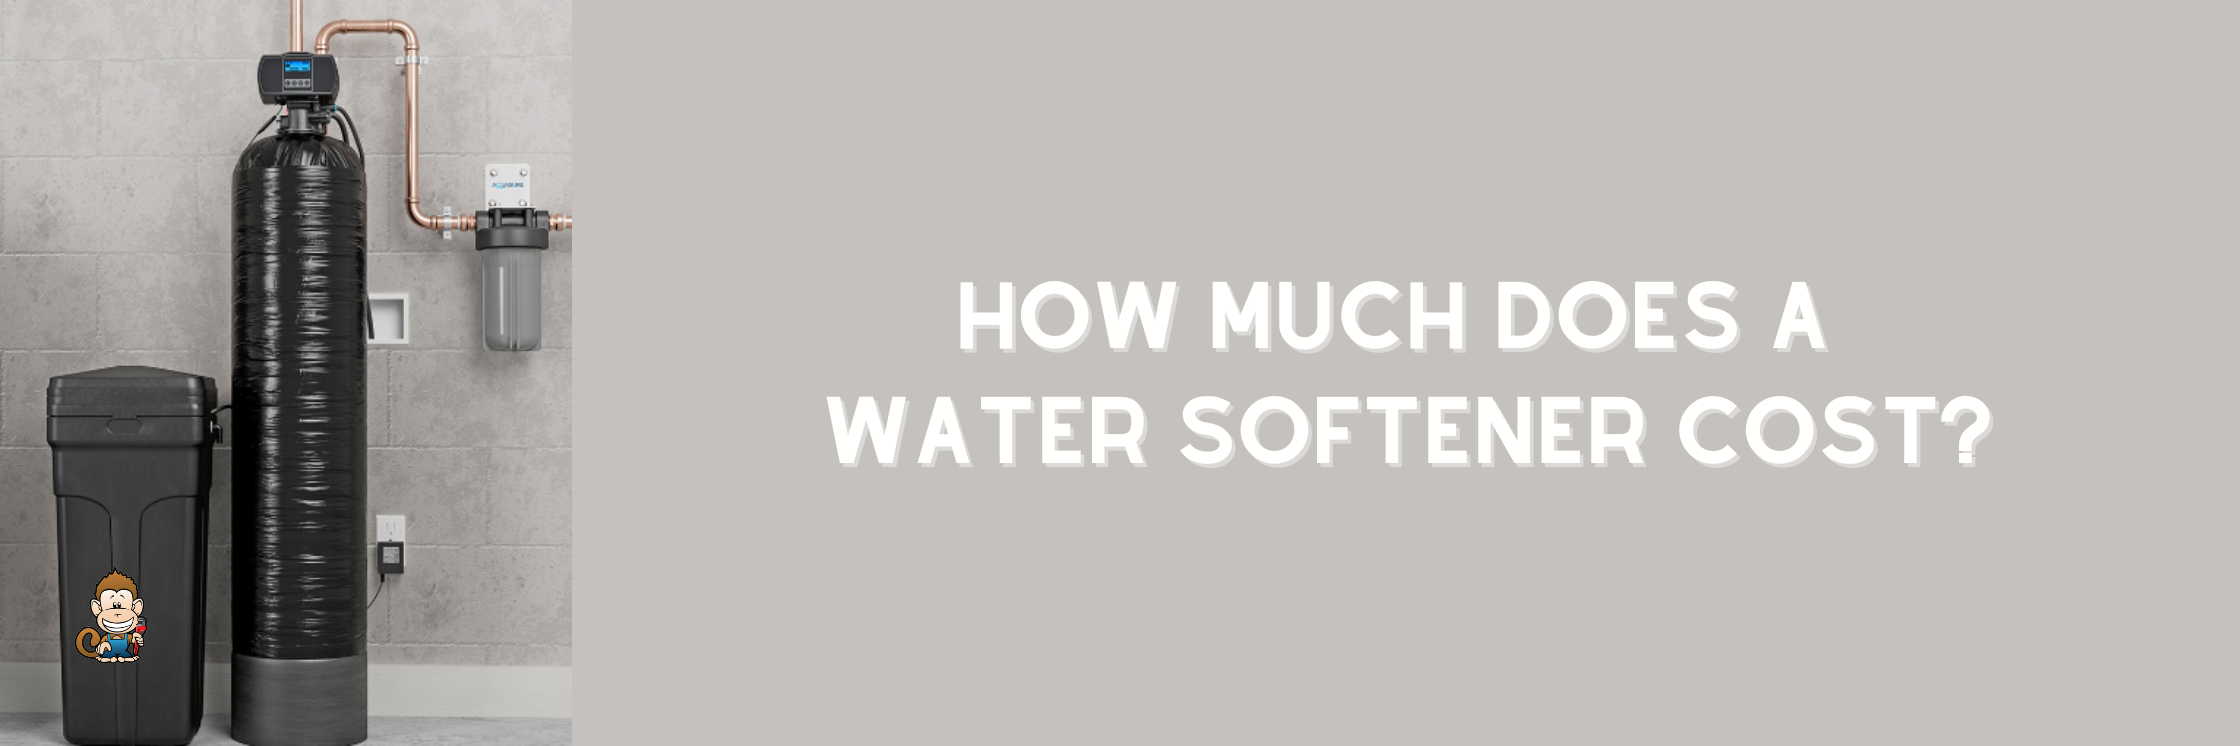 How Much Does a Water Softener Cost? (Video)